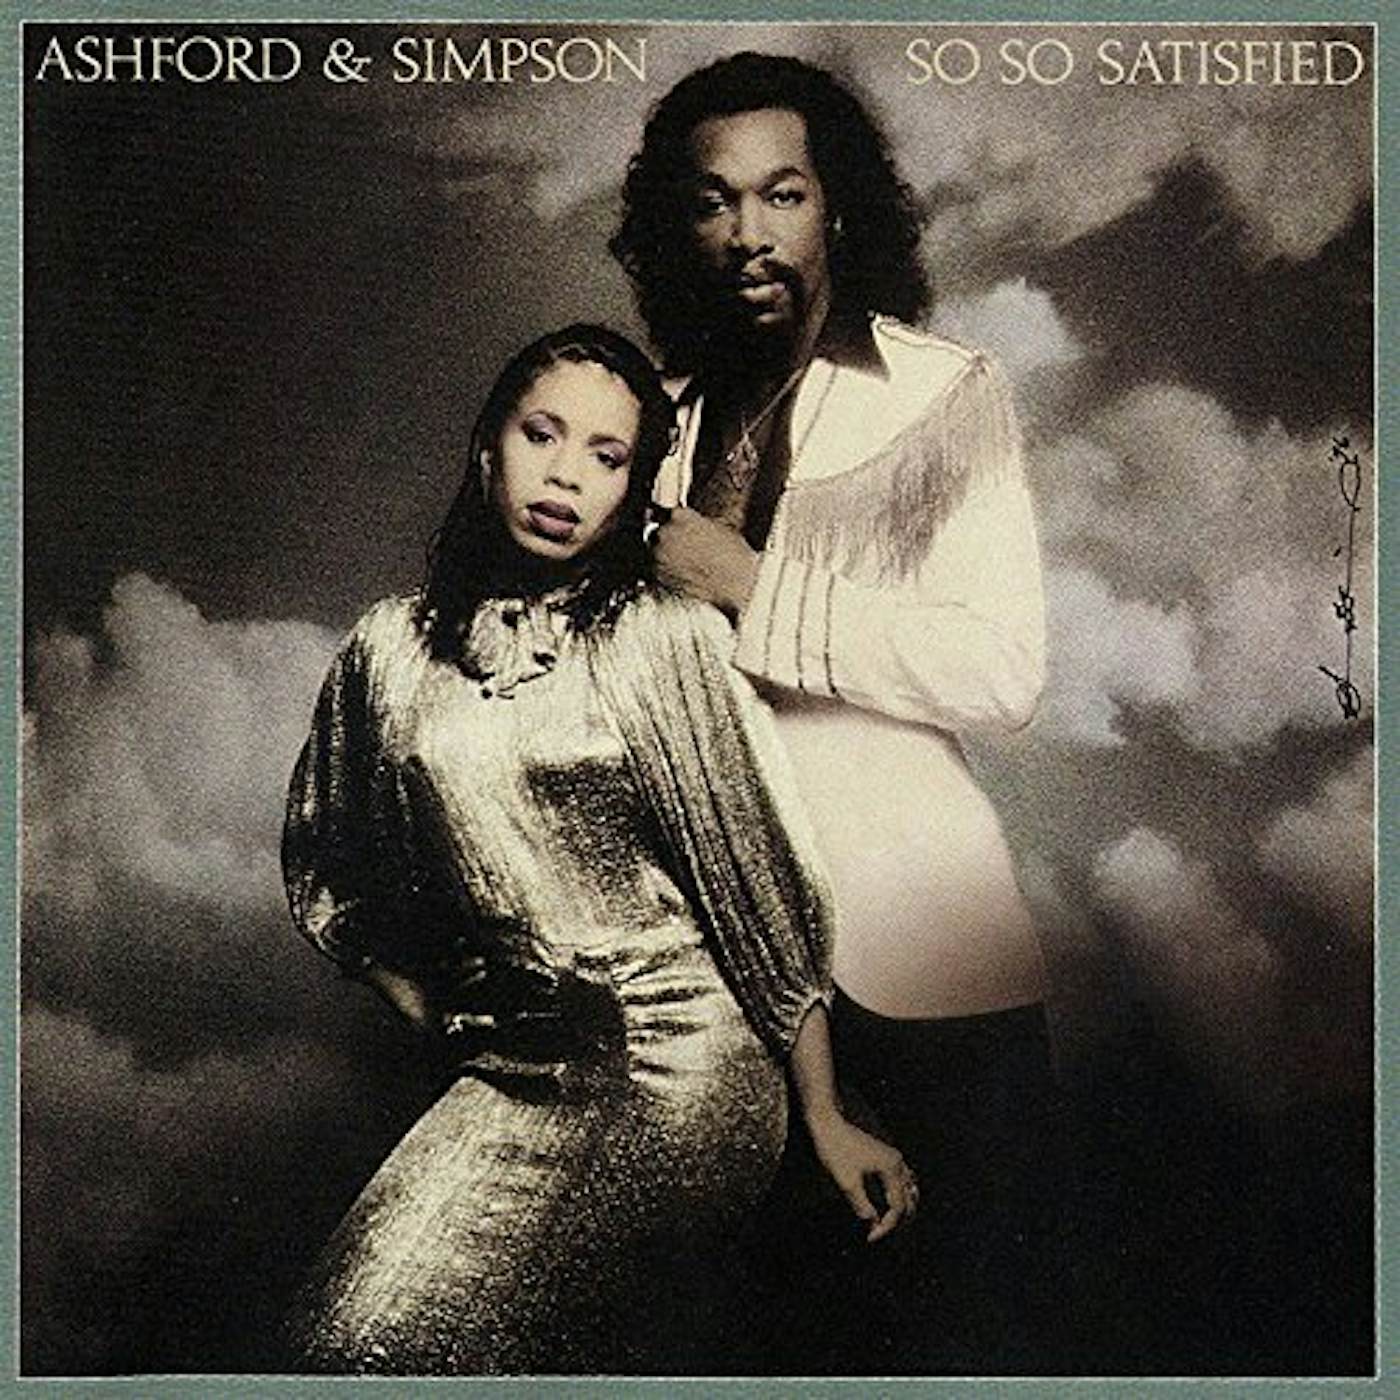 Ashford & Simpson SO SO SATISFIED: EXPANDED EDITION CD